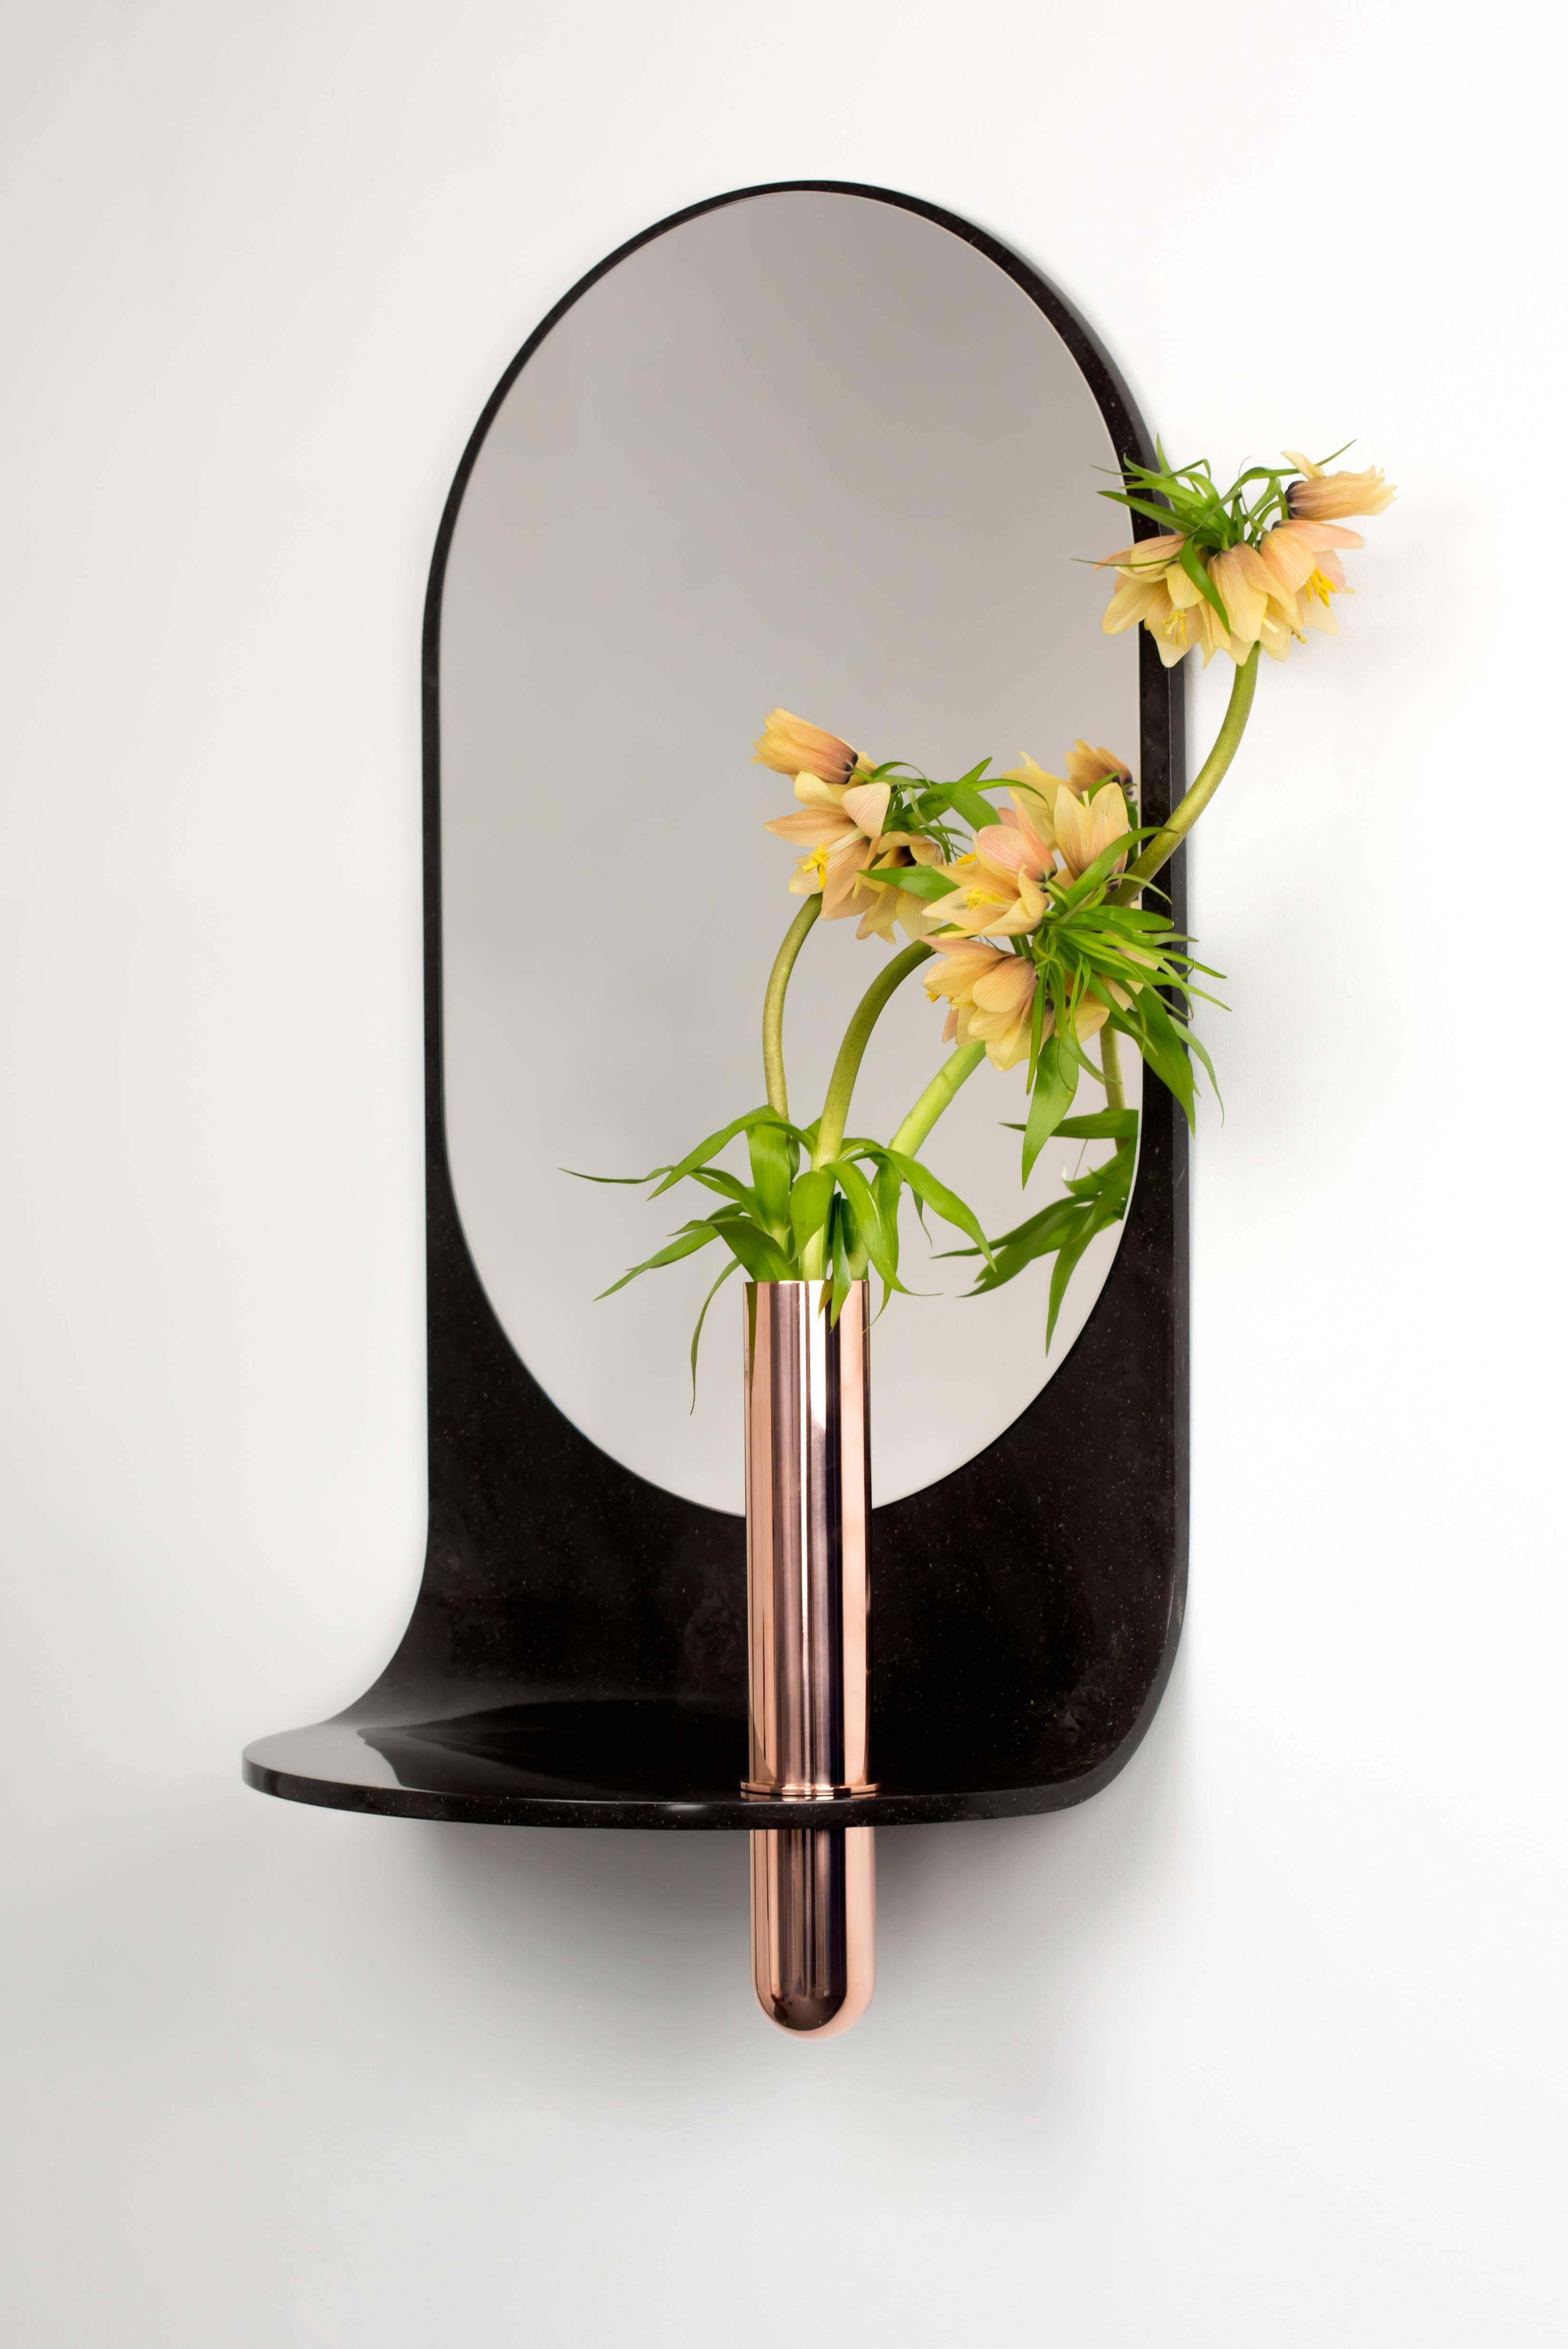 Swoop Mirror in Curved Stone with Copper Vase by Birnam Wood Studio 1